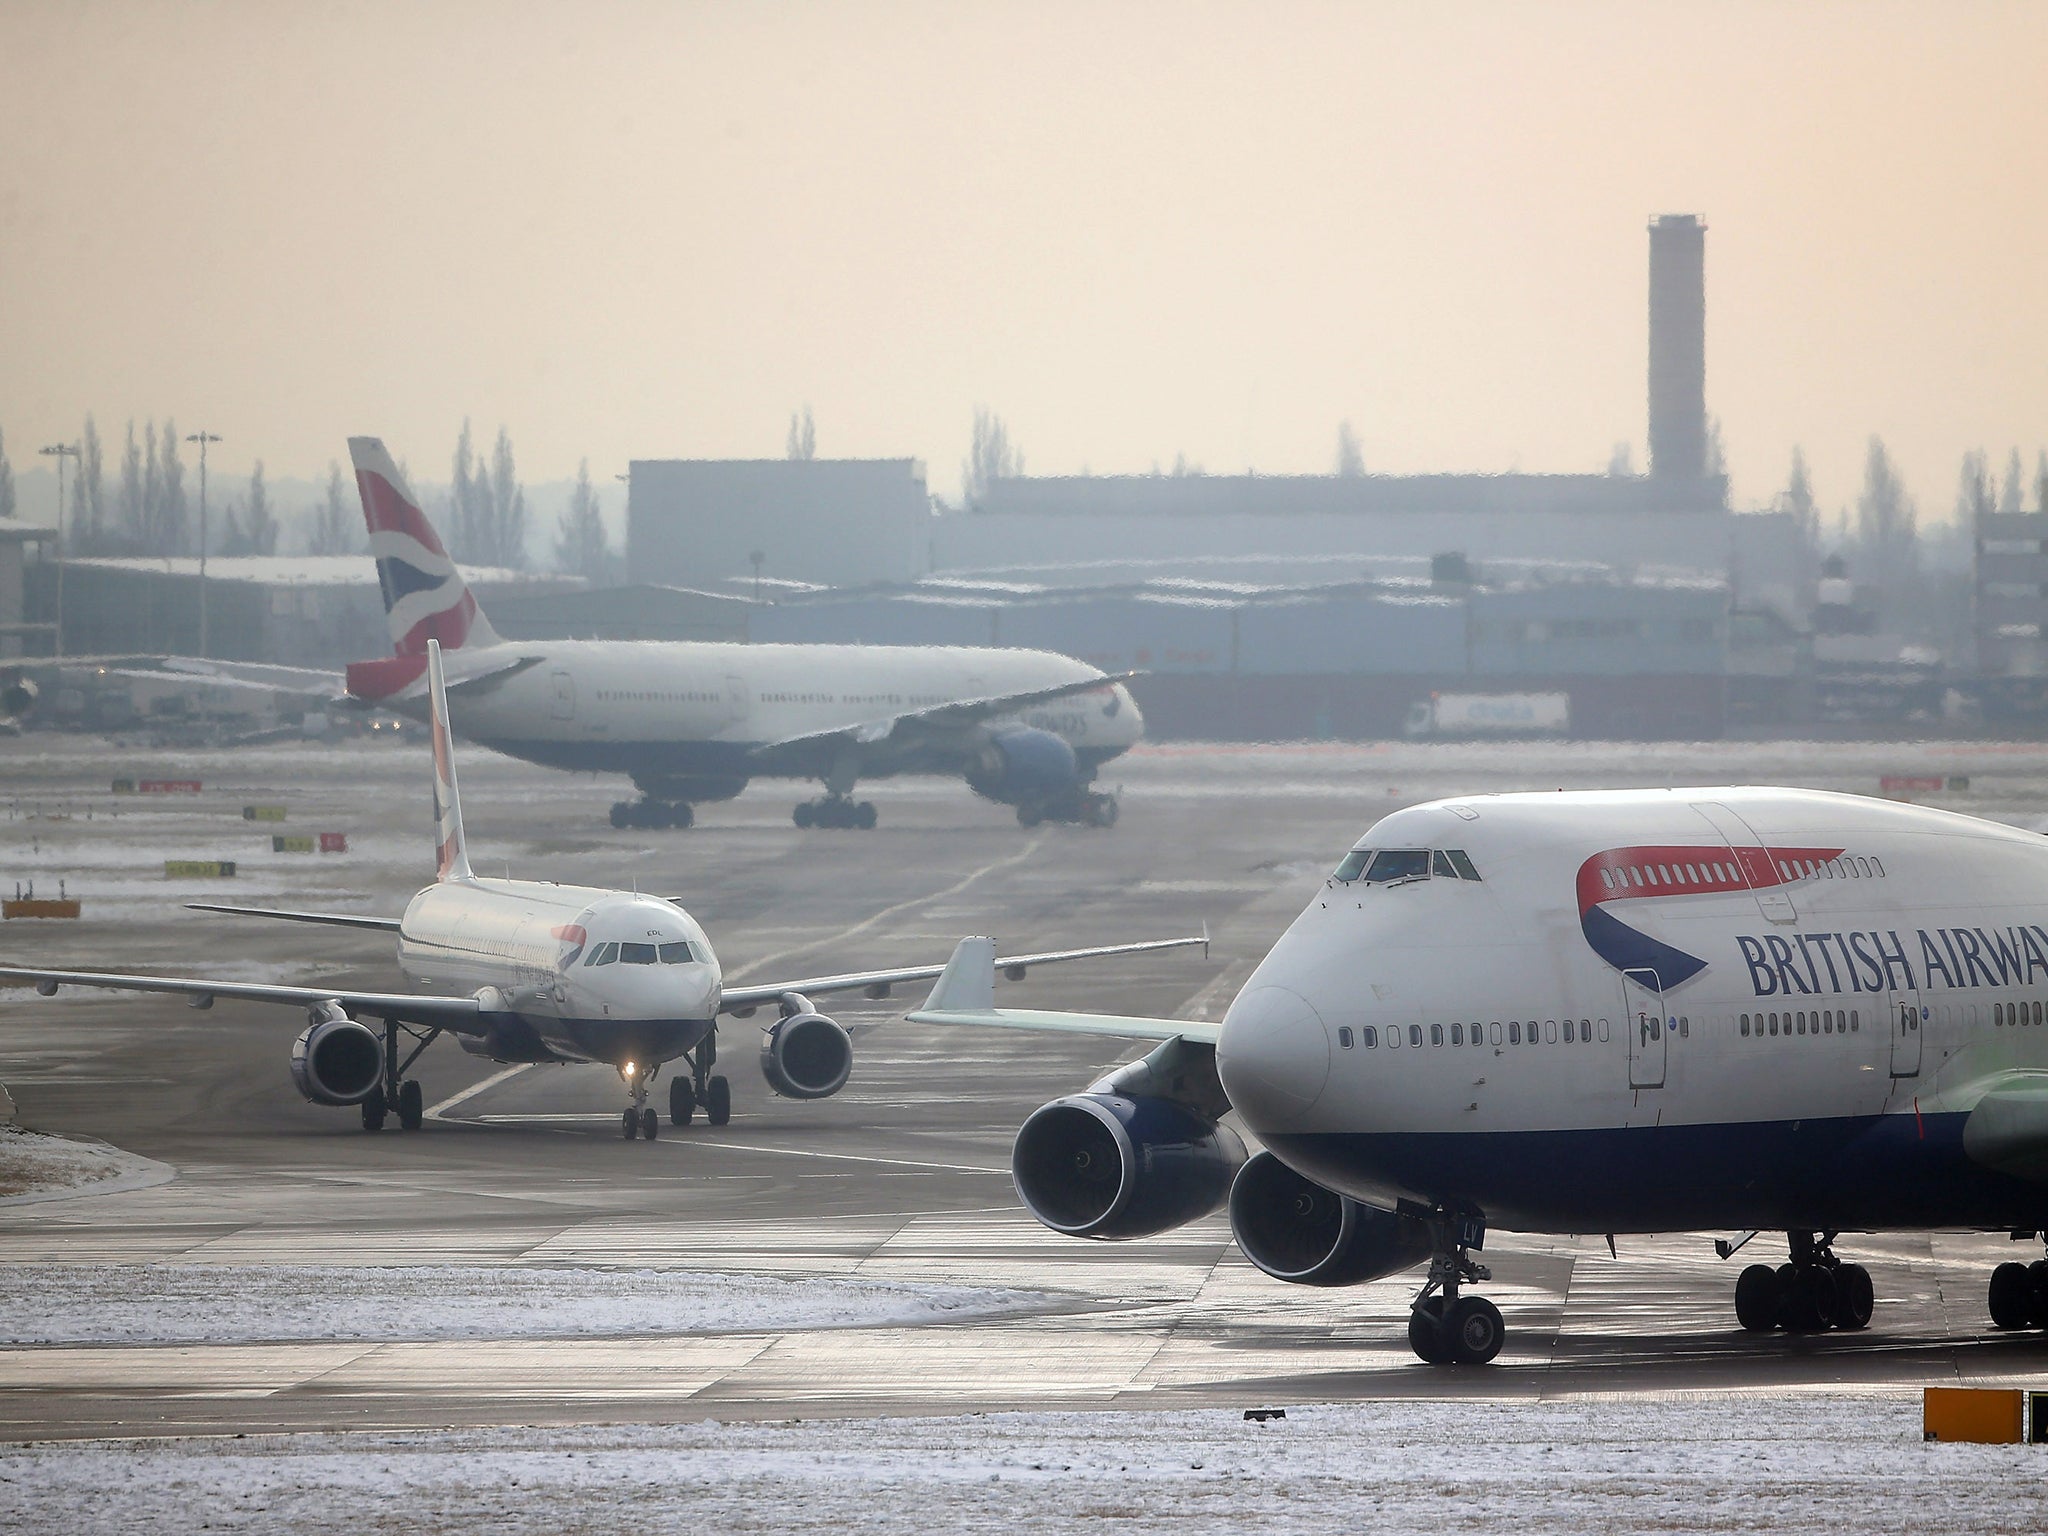 Passengers disembarked as normal at Heathrow airport